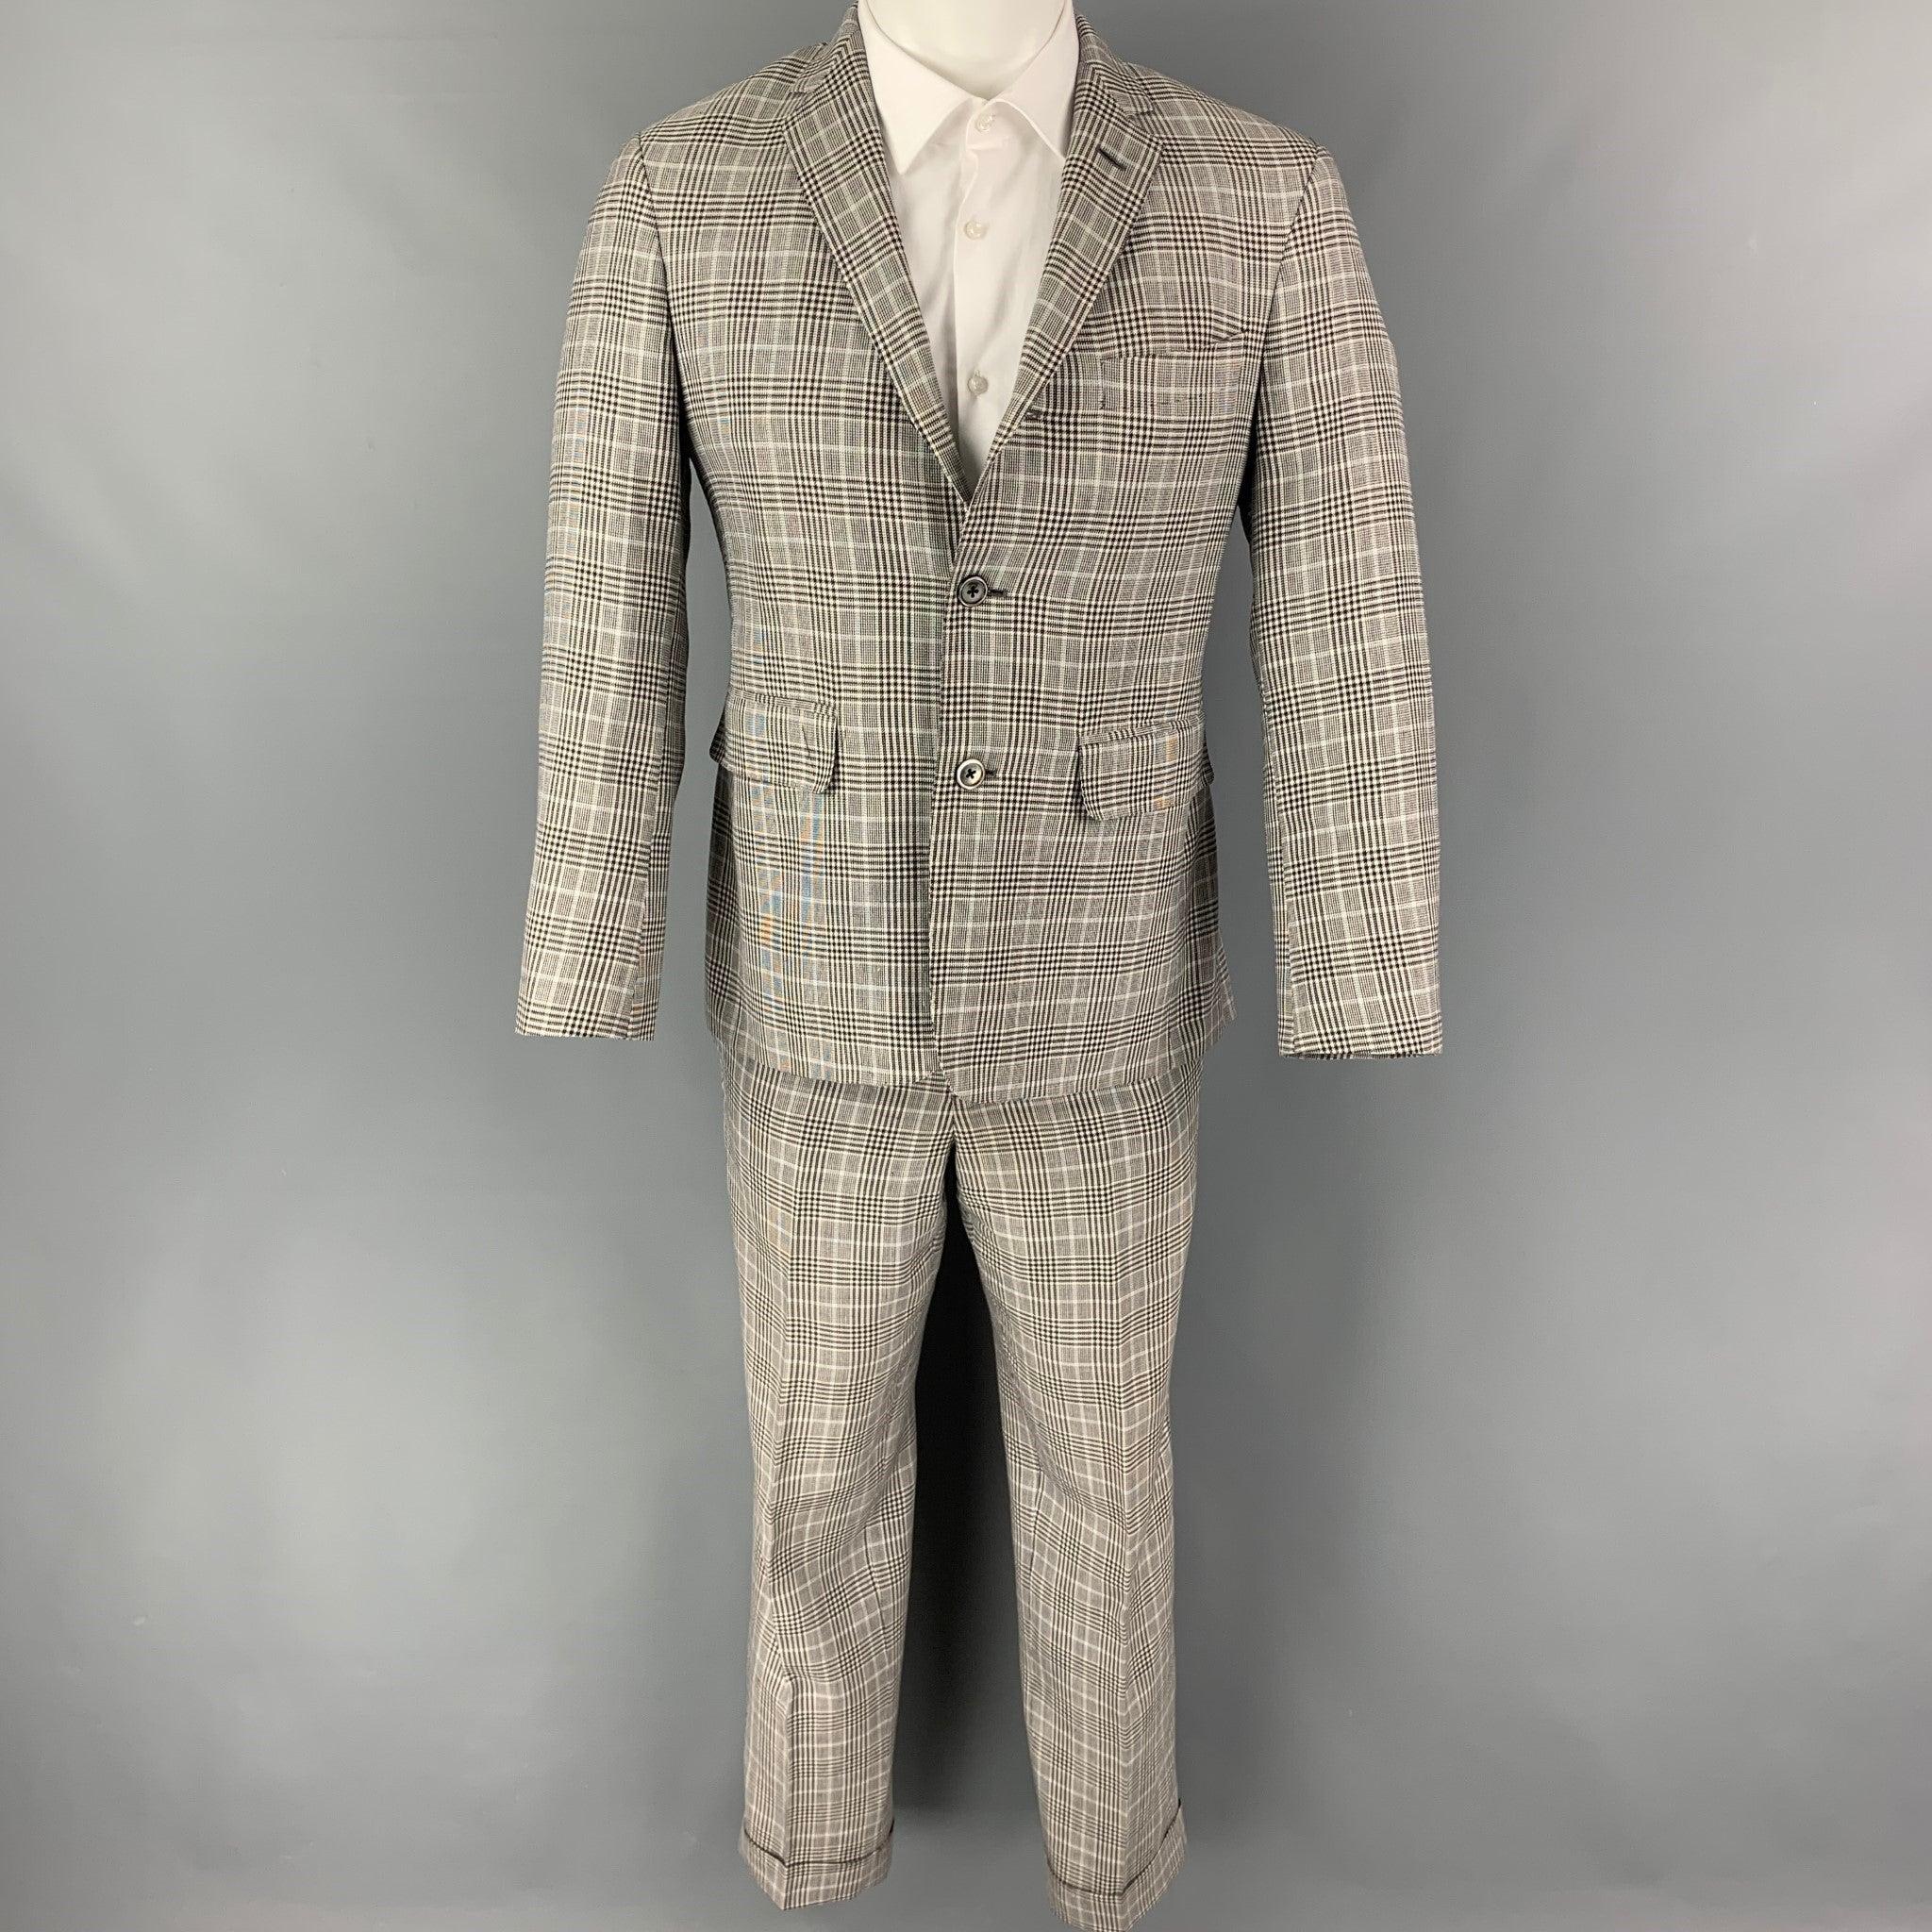 BLACK FLEECE
suit comes in a black & white glenplaid wool blend with a full liner and includes a single breasted, three button sport coat with a notch lapel and matching flat front trousers. Very Good Pre-Owned Condition. 

Marked:   BB1